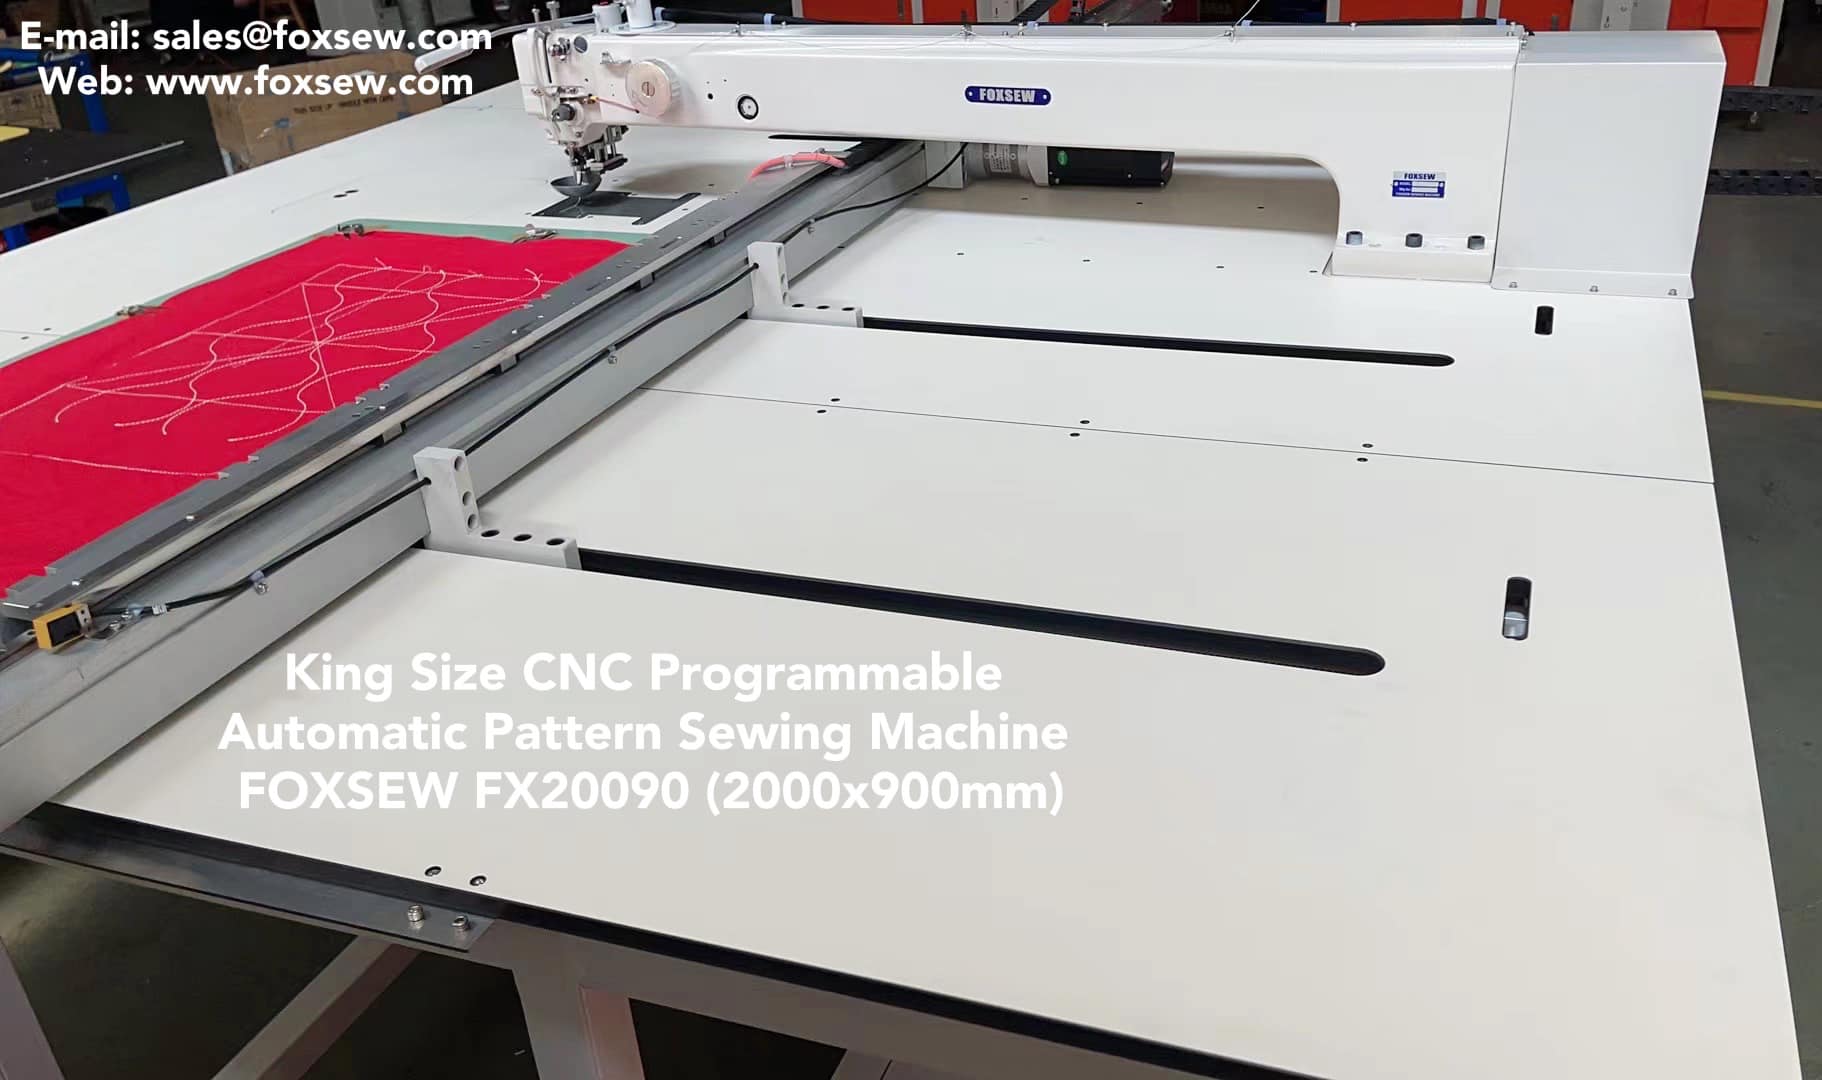 Extra Large Size CNC Programmable Electronic Automatic Pattern Sewing Machines FOXSEW FX20090 -1